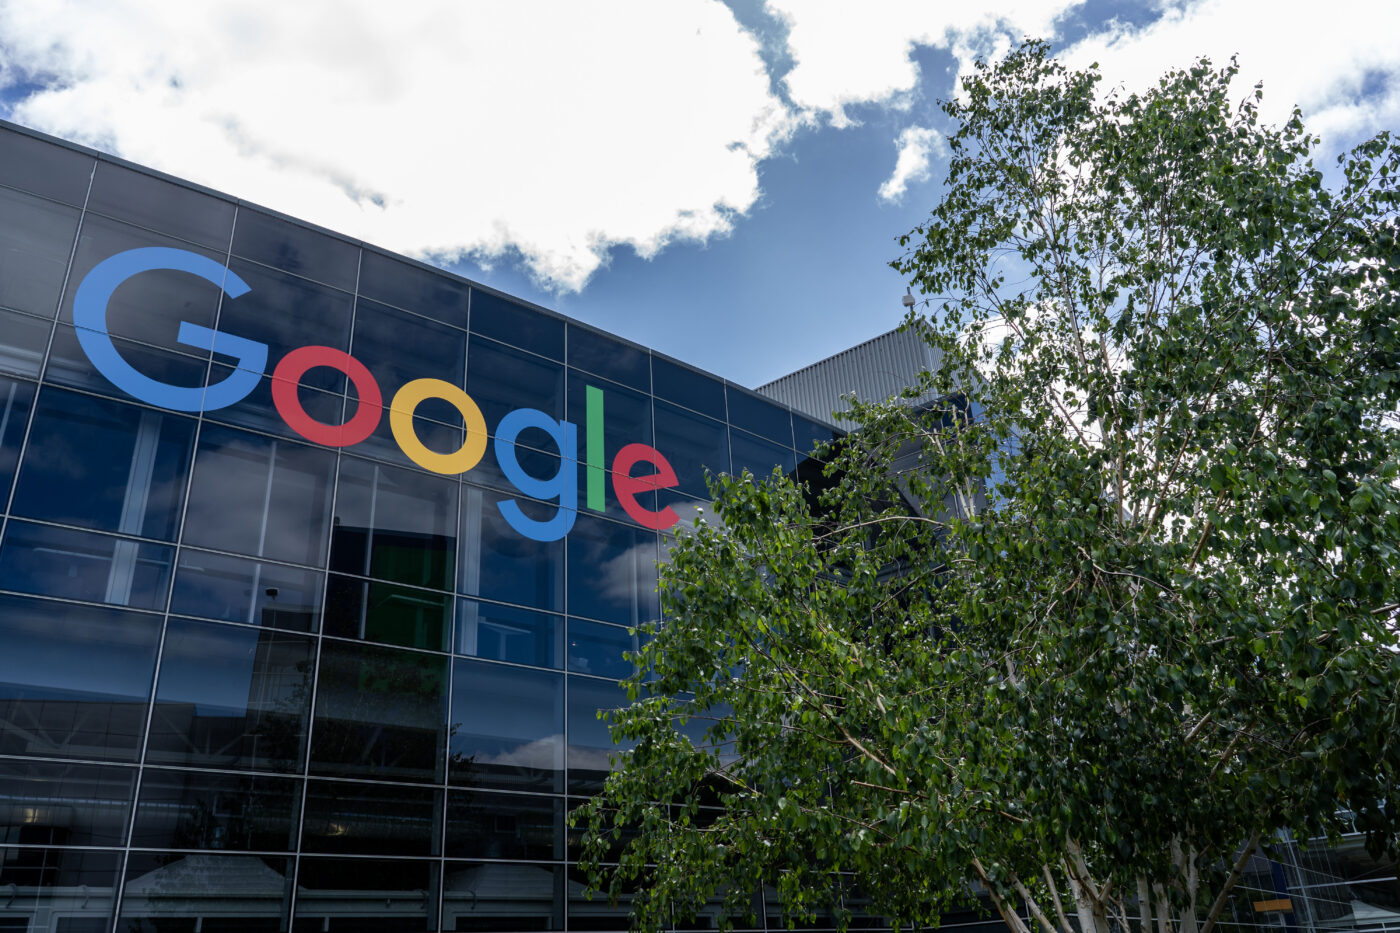 Google campus in Mountain View, California on Wednesday May 10, 2023. (Melina Mara/The Washington Post via Getty Images)